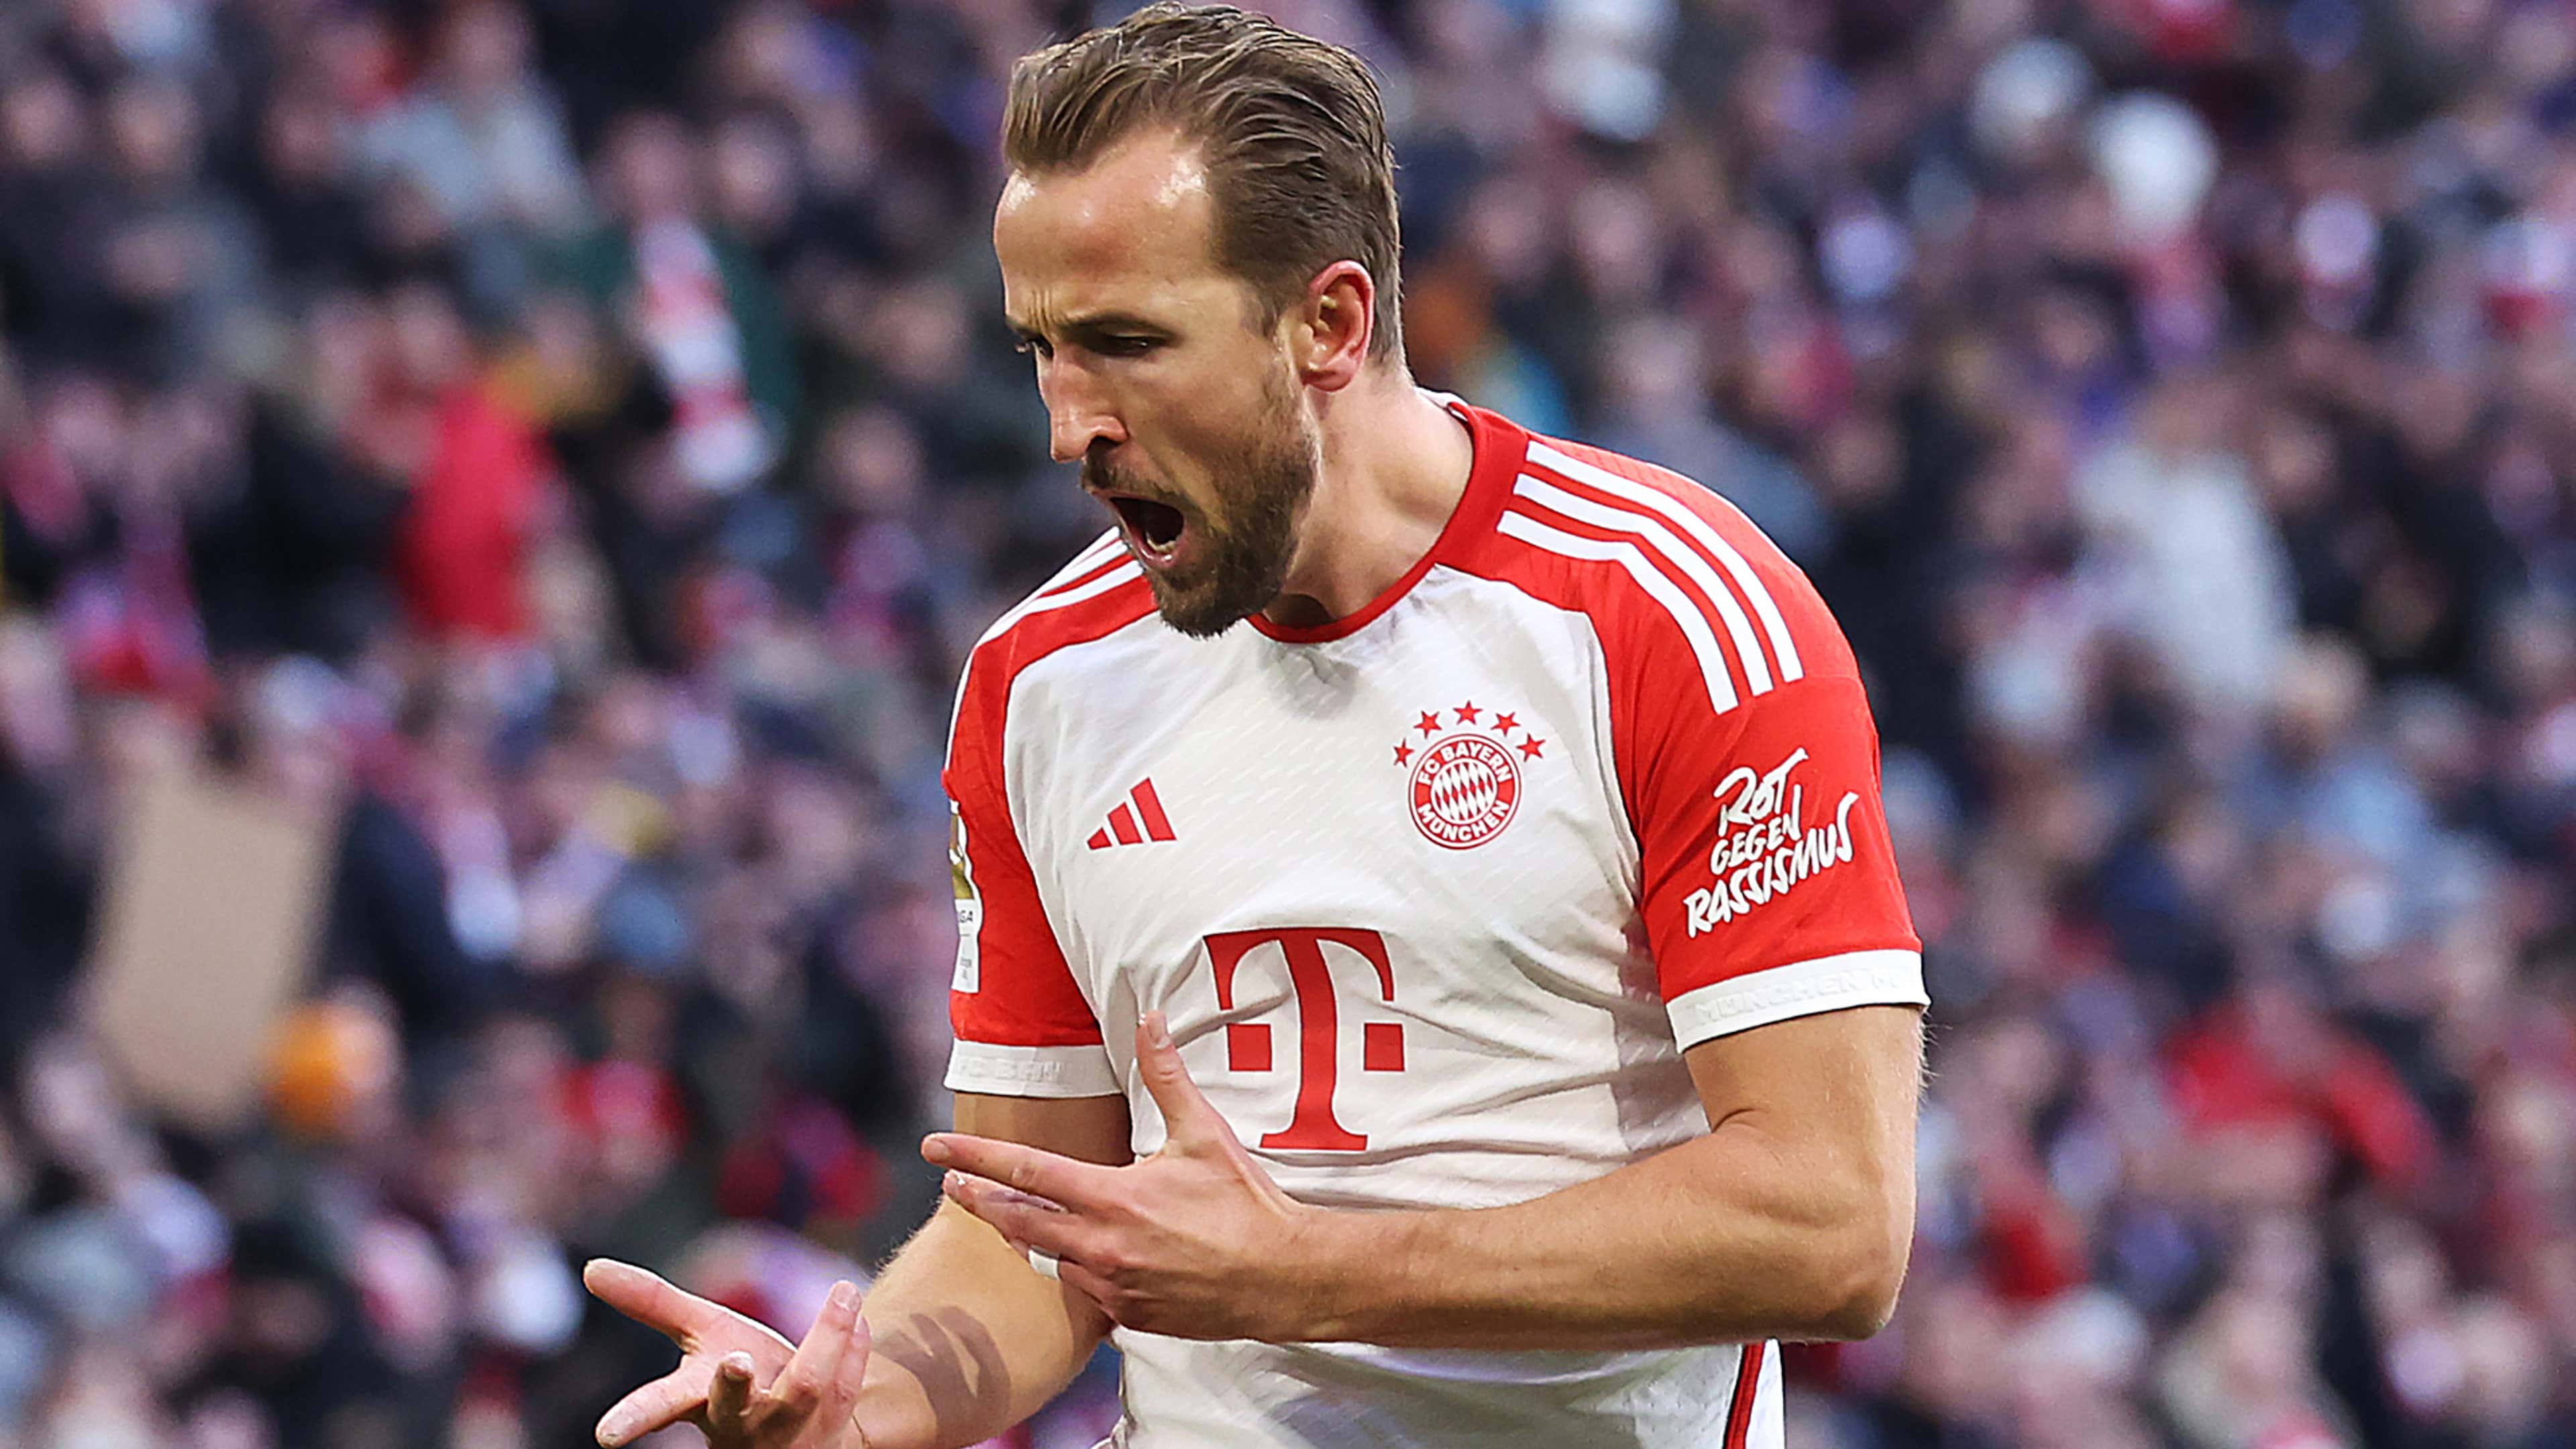 Love at first sight' - Harry Kane's impact at Bayern hailed by Karl-Heinz Rummenigge who reveals what's impressed him most about England star | Goal.com